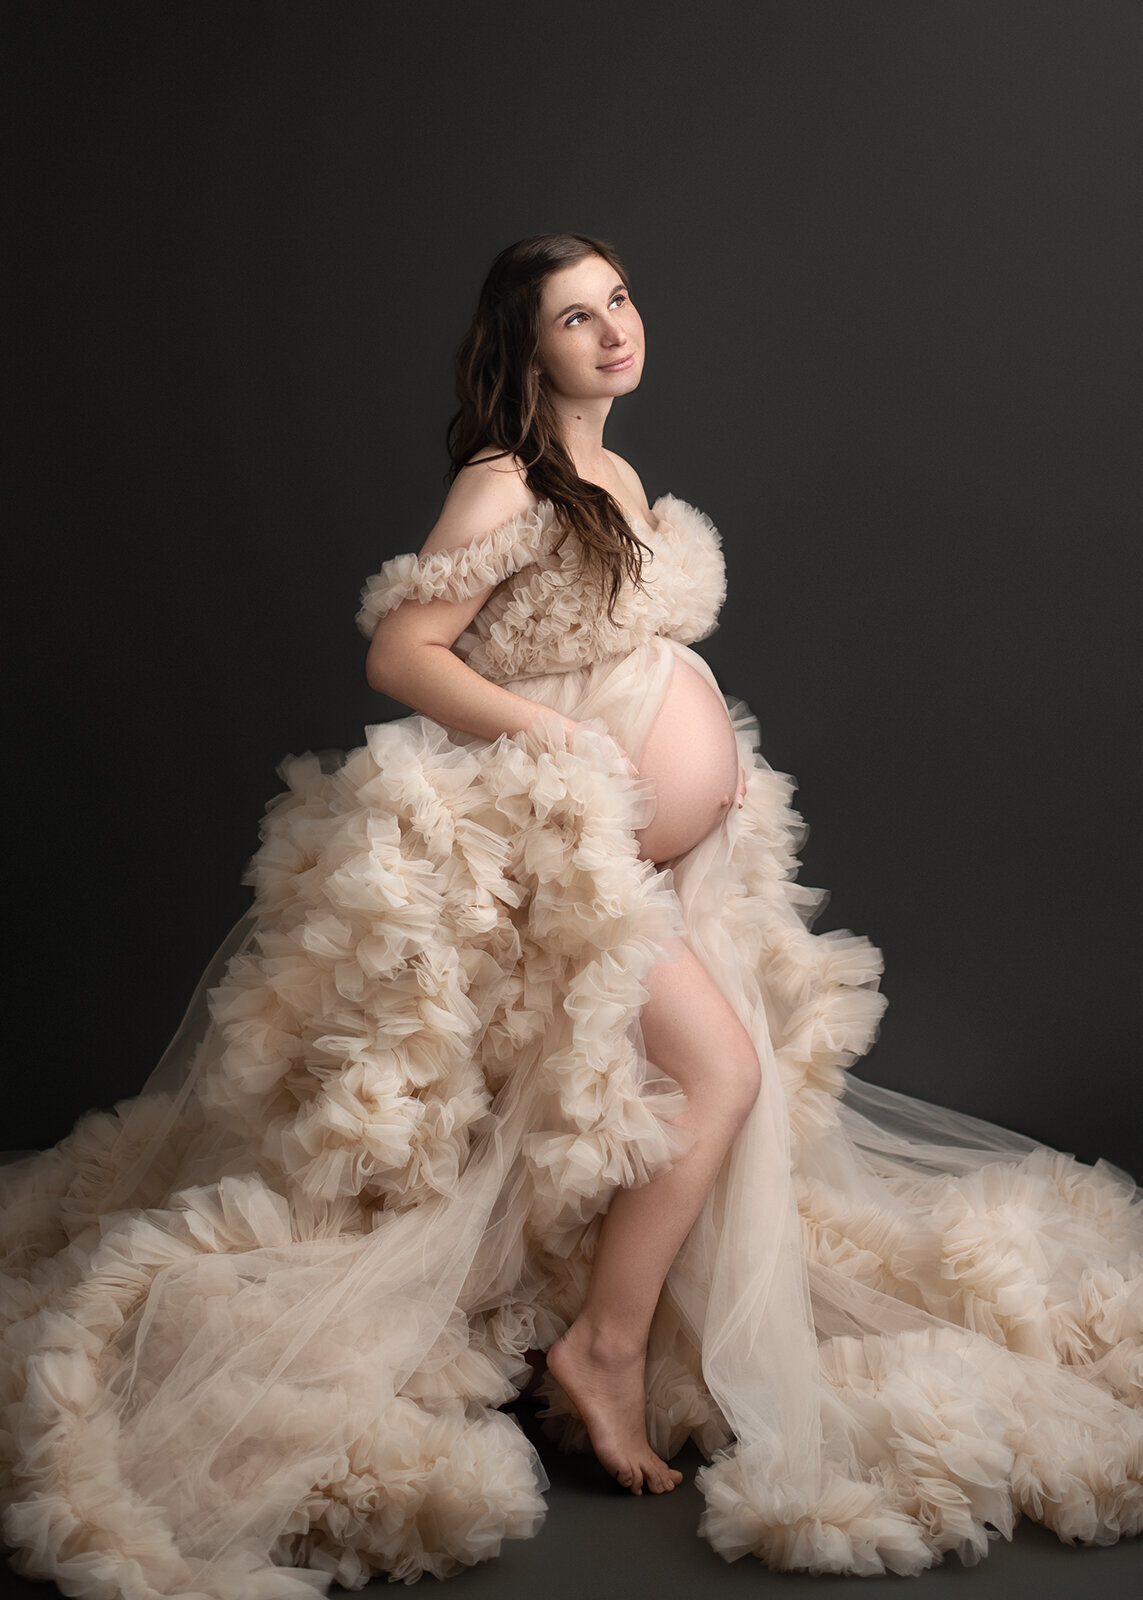 pregnant woman at her maternity photoshoot in St. Louis, Missouri